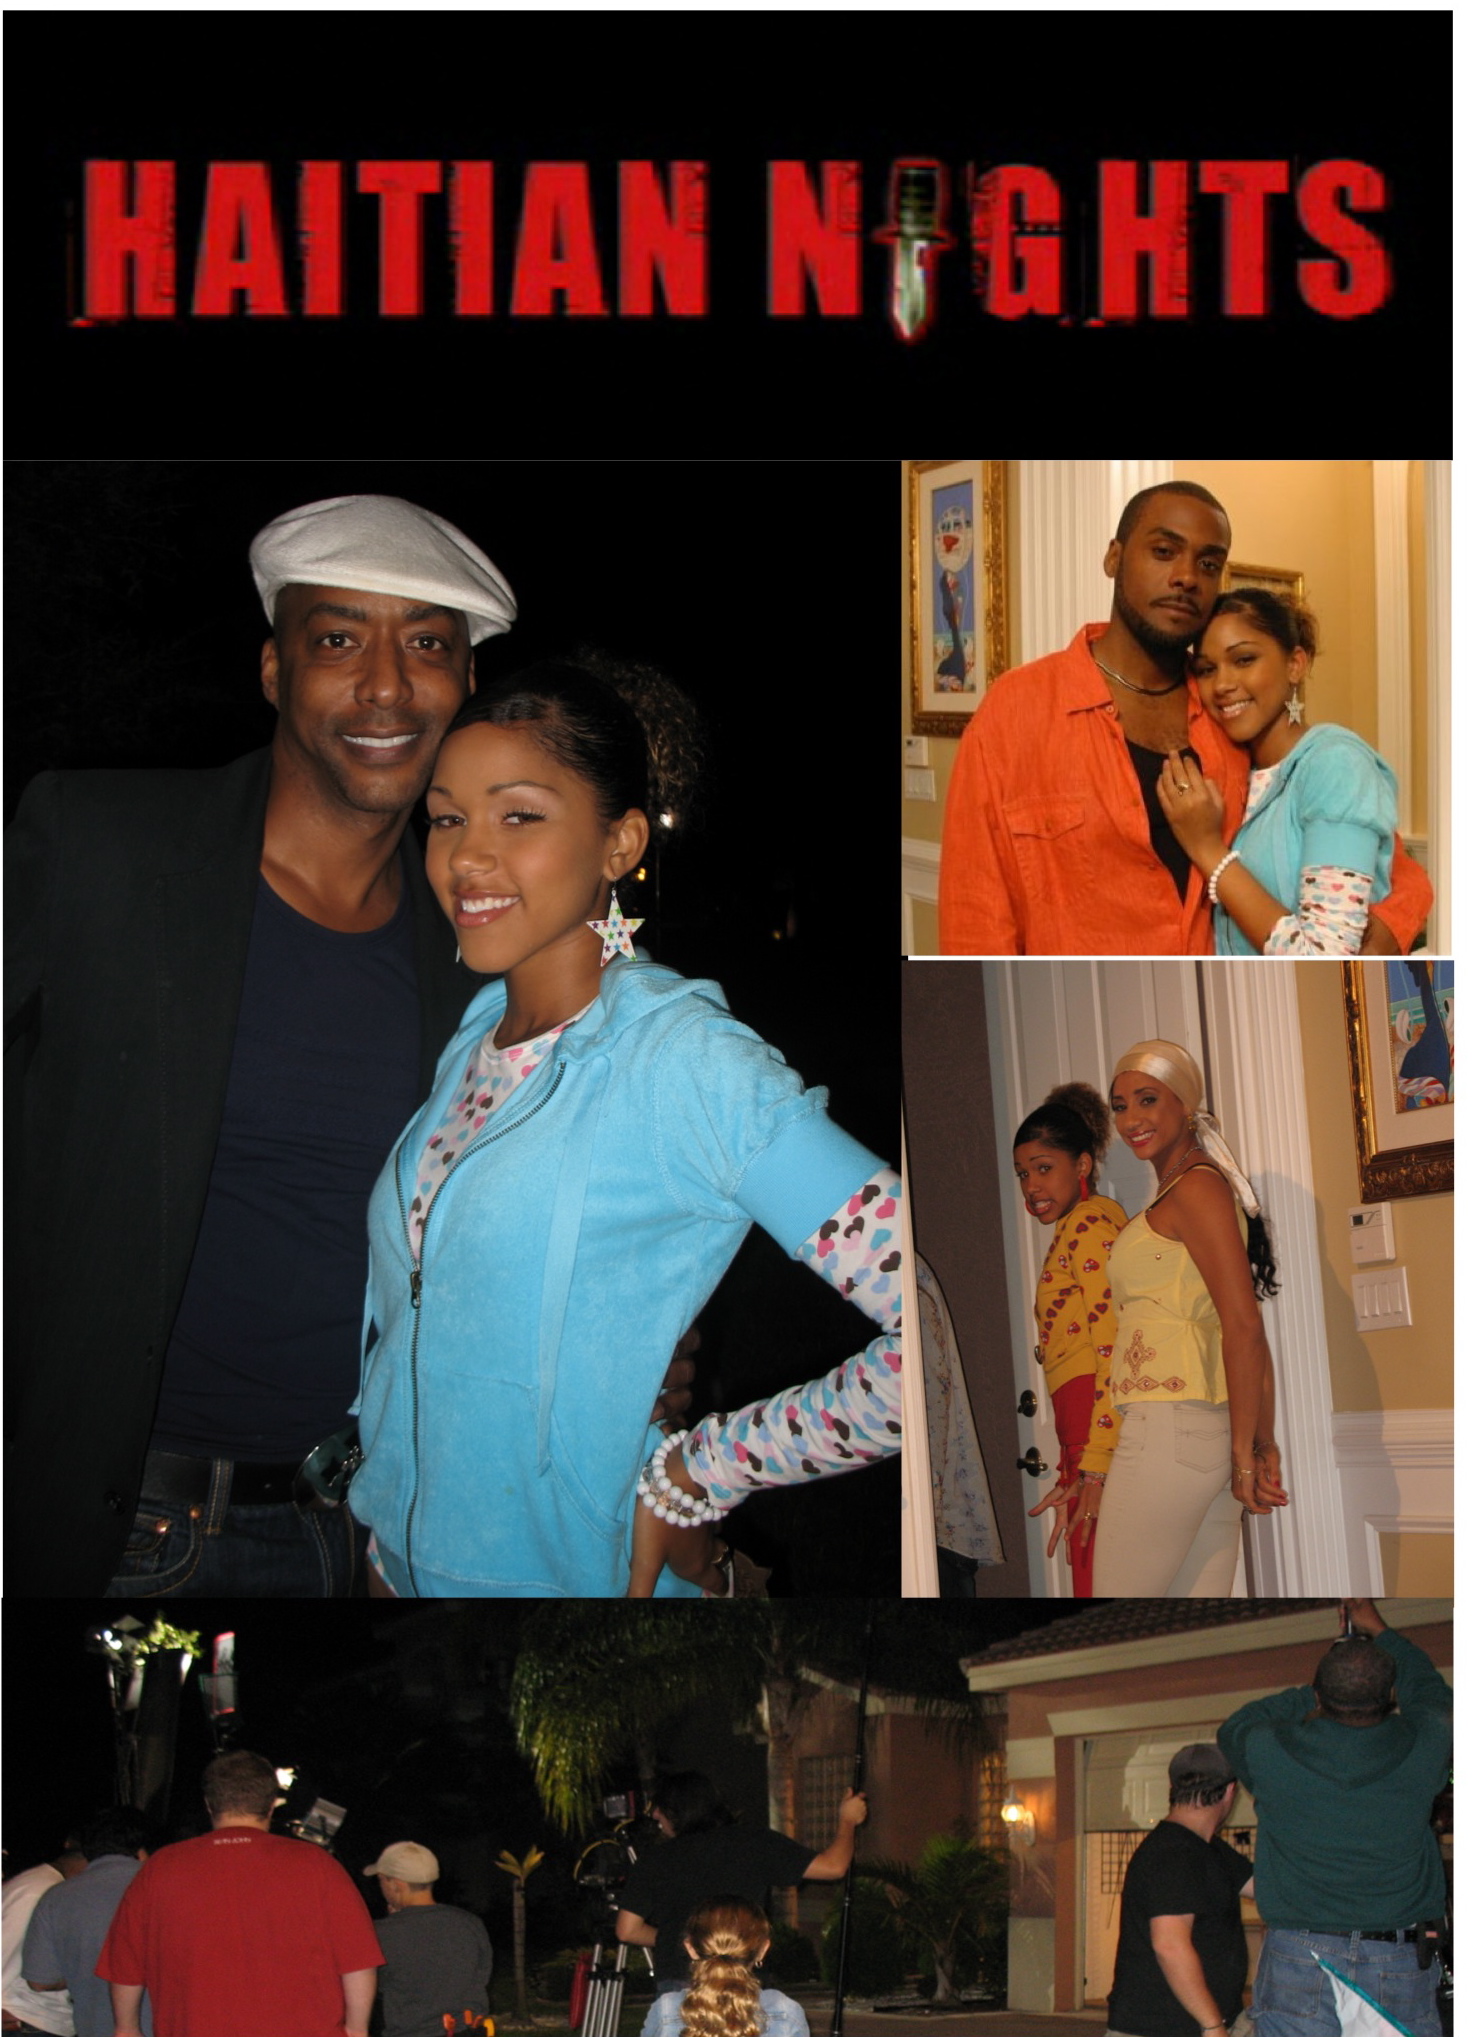 Katrina Rose Tandy playing the part of: Cady in the film 'Haitian Nights' with Miguel A. Núñez Jr (Gary) & William L. Johnson (Blazi) 2008-2009